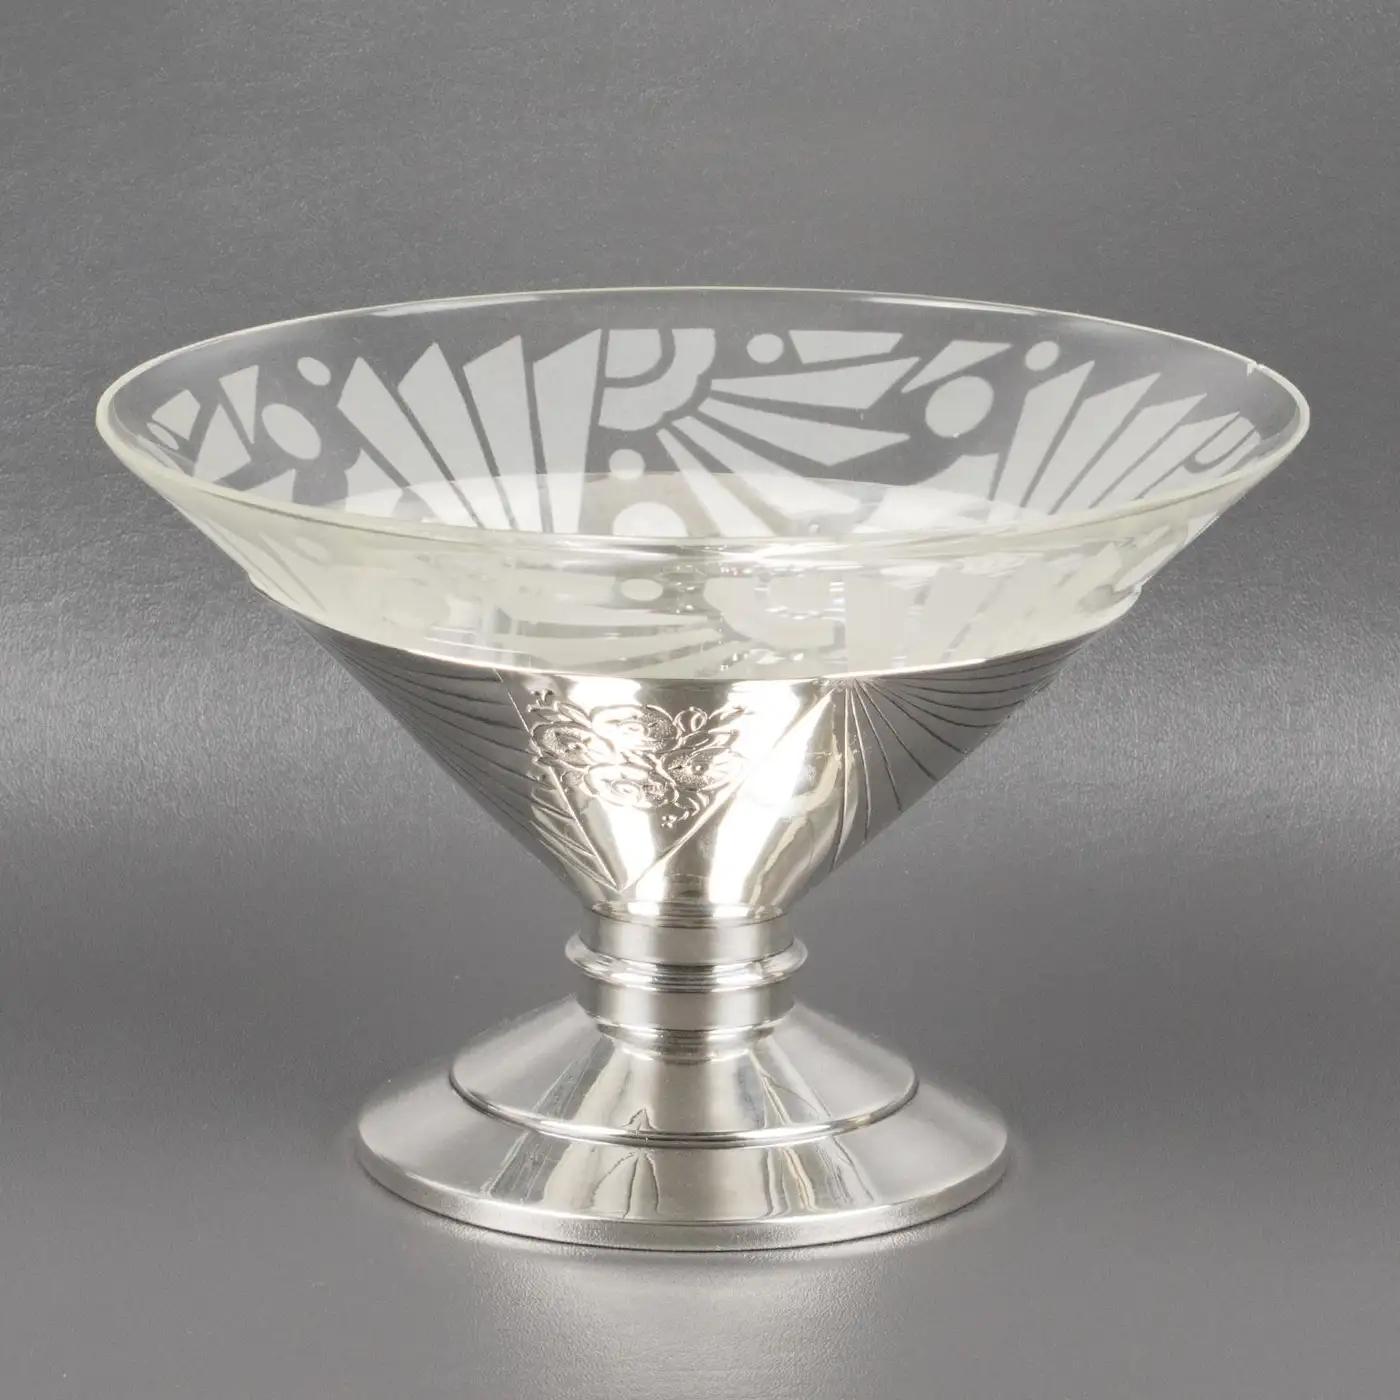 Mid-20th Century Art Deco Silver Plate and Etched Glass Centerpiece Bowl, 1930s For Sale